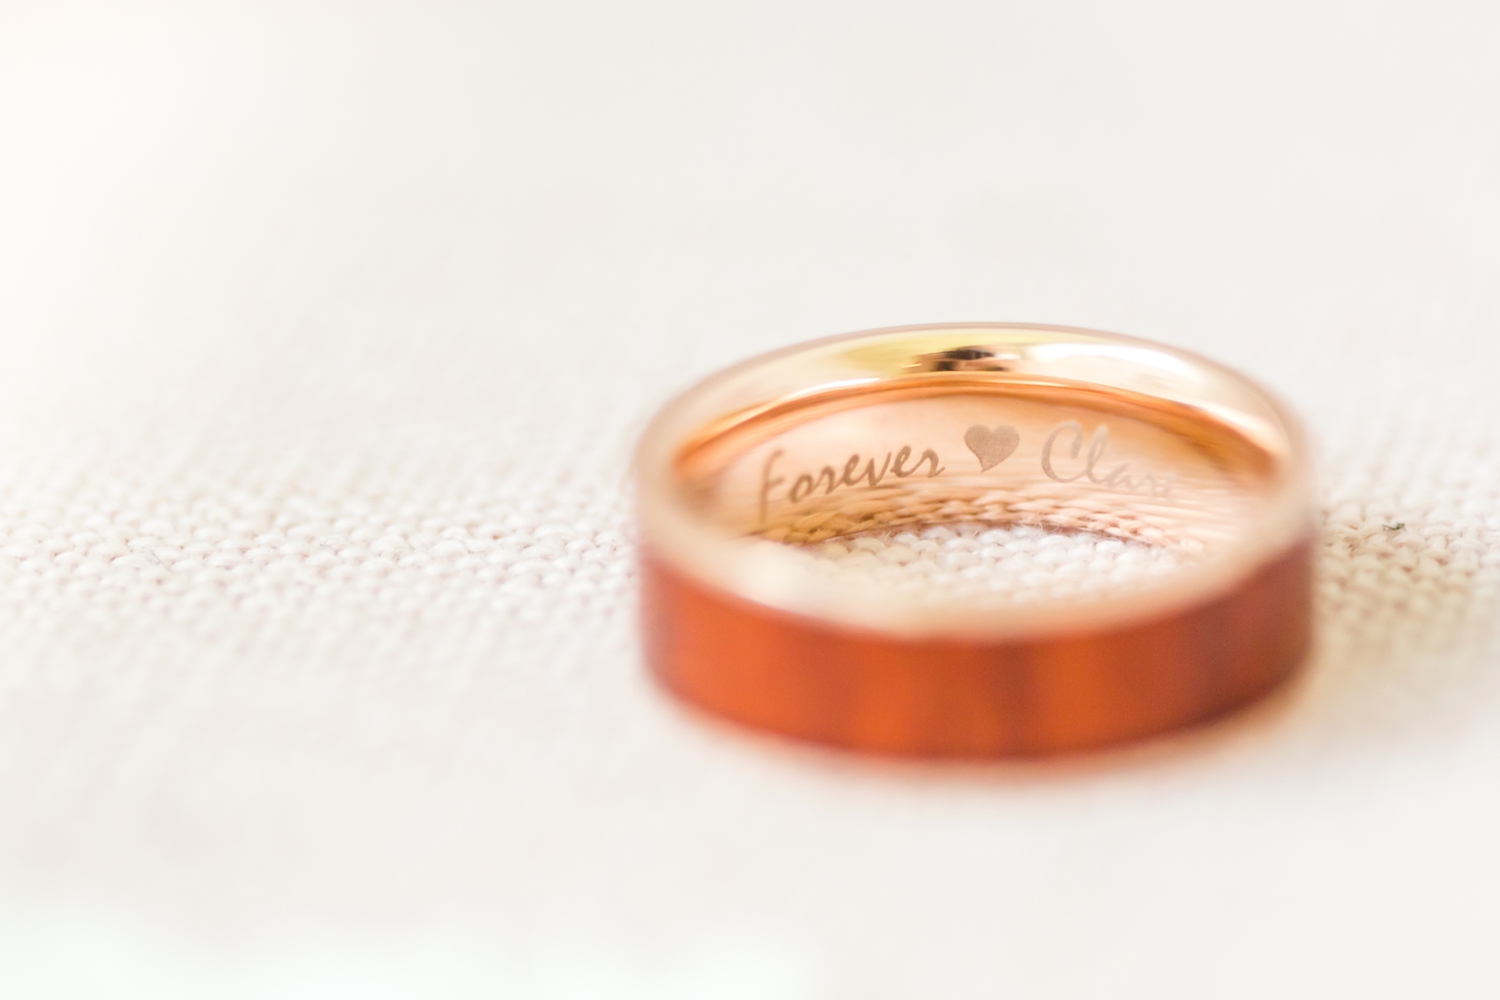  Love this engraving in Steven’s ring!  